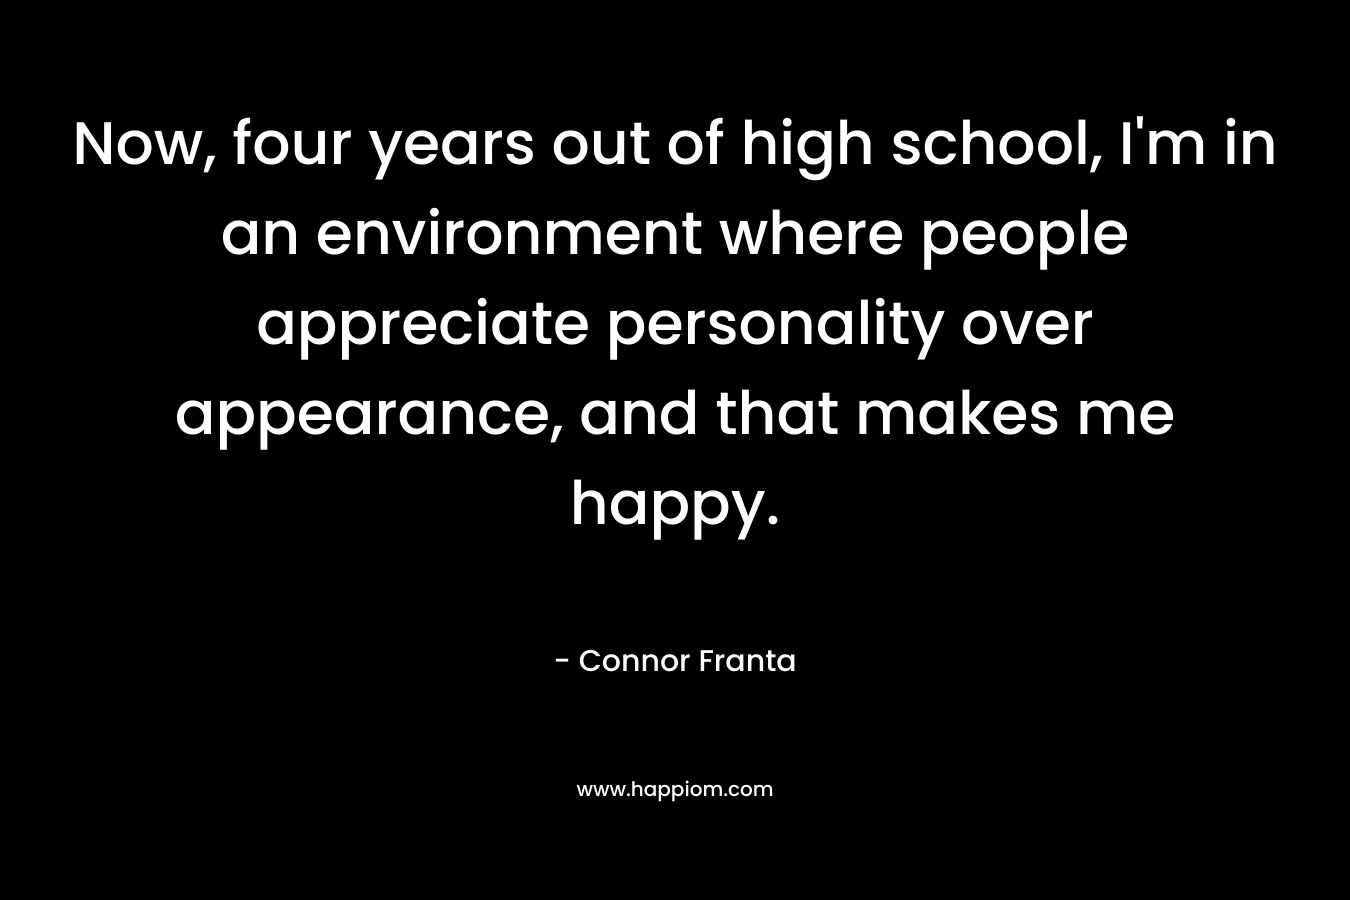 Now, four years out of high school, I’m in an environment where people appreciate personality over appearance, and that makes me happy. – Connor Franta